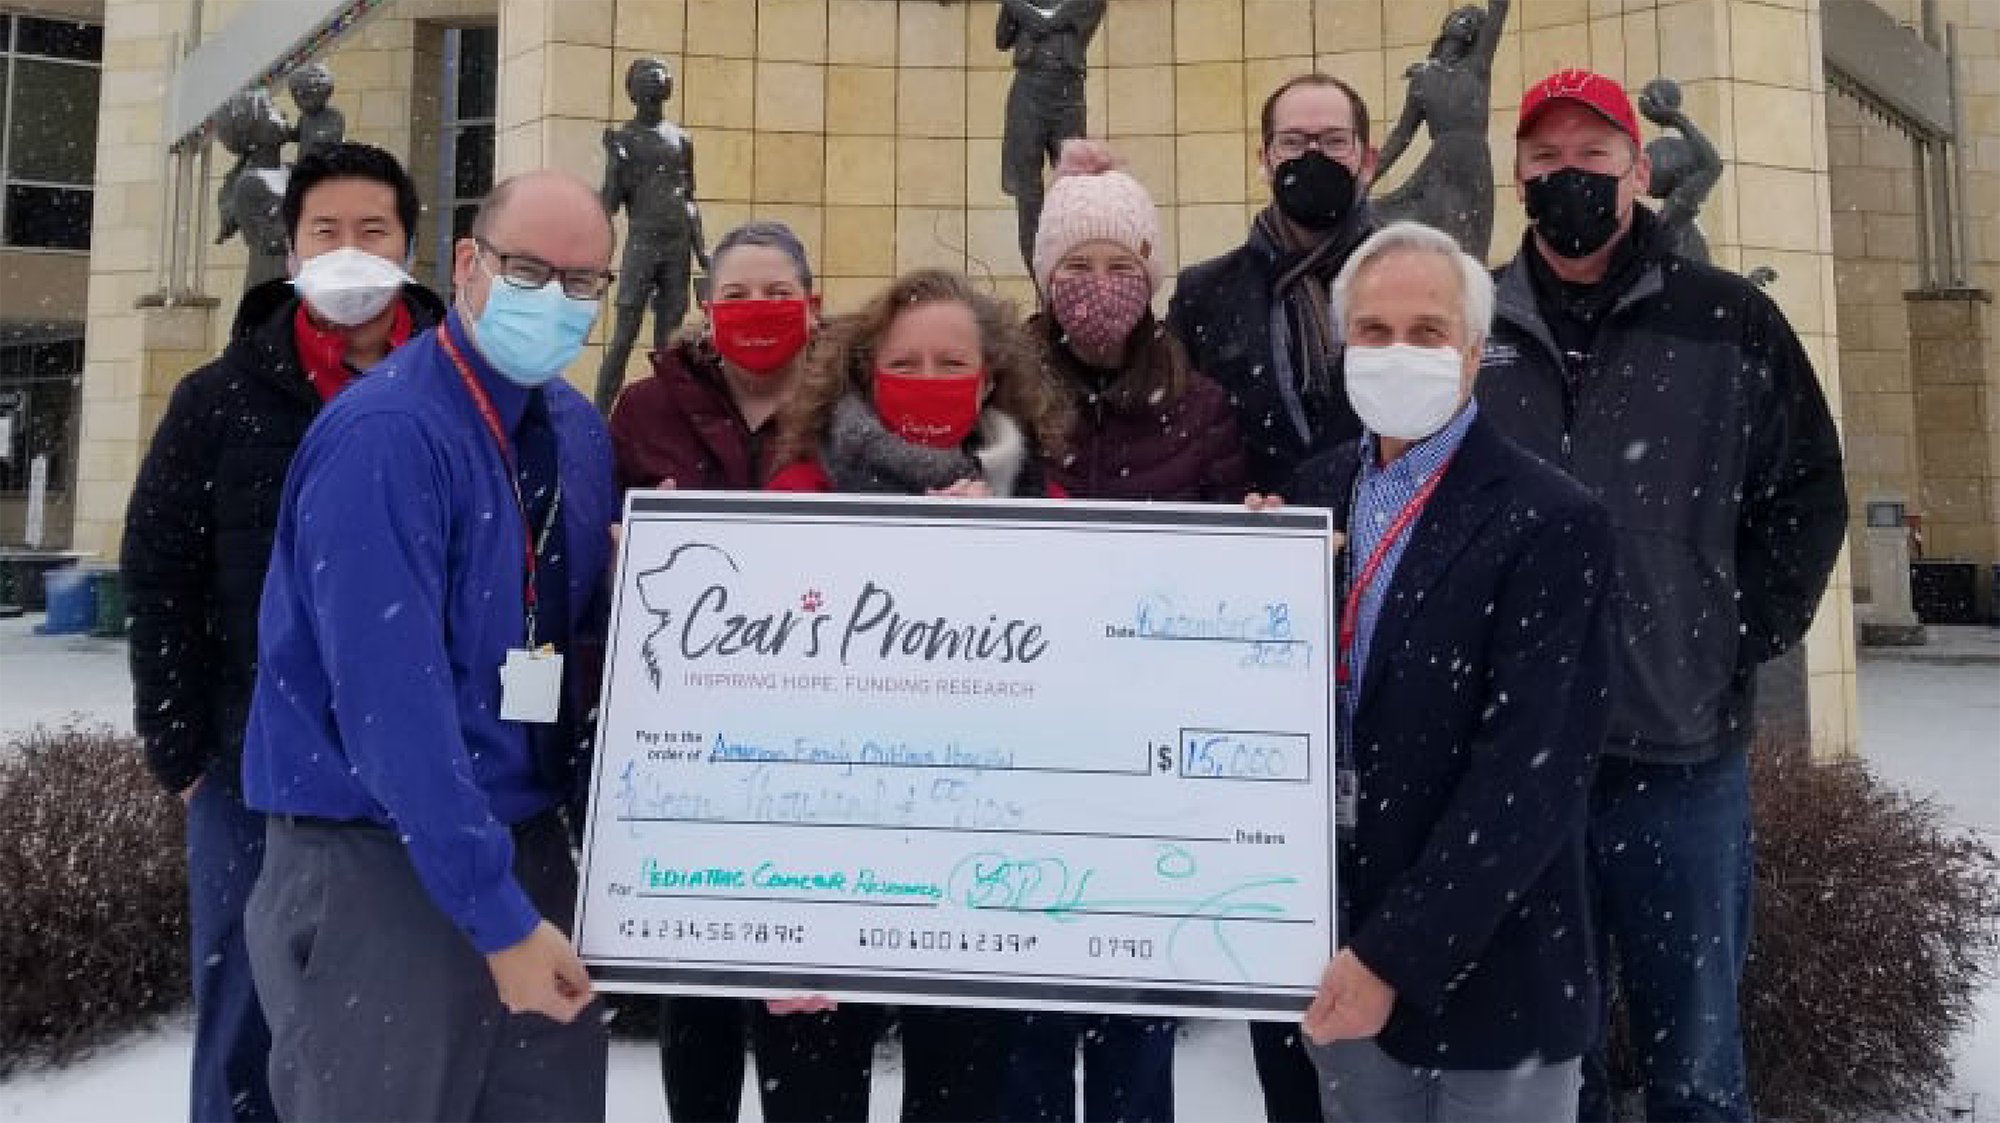 Group photo with donation check